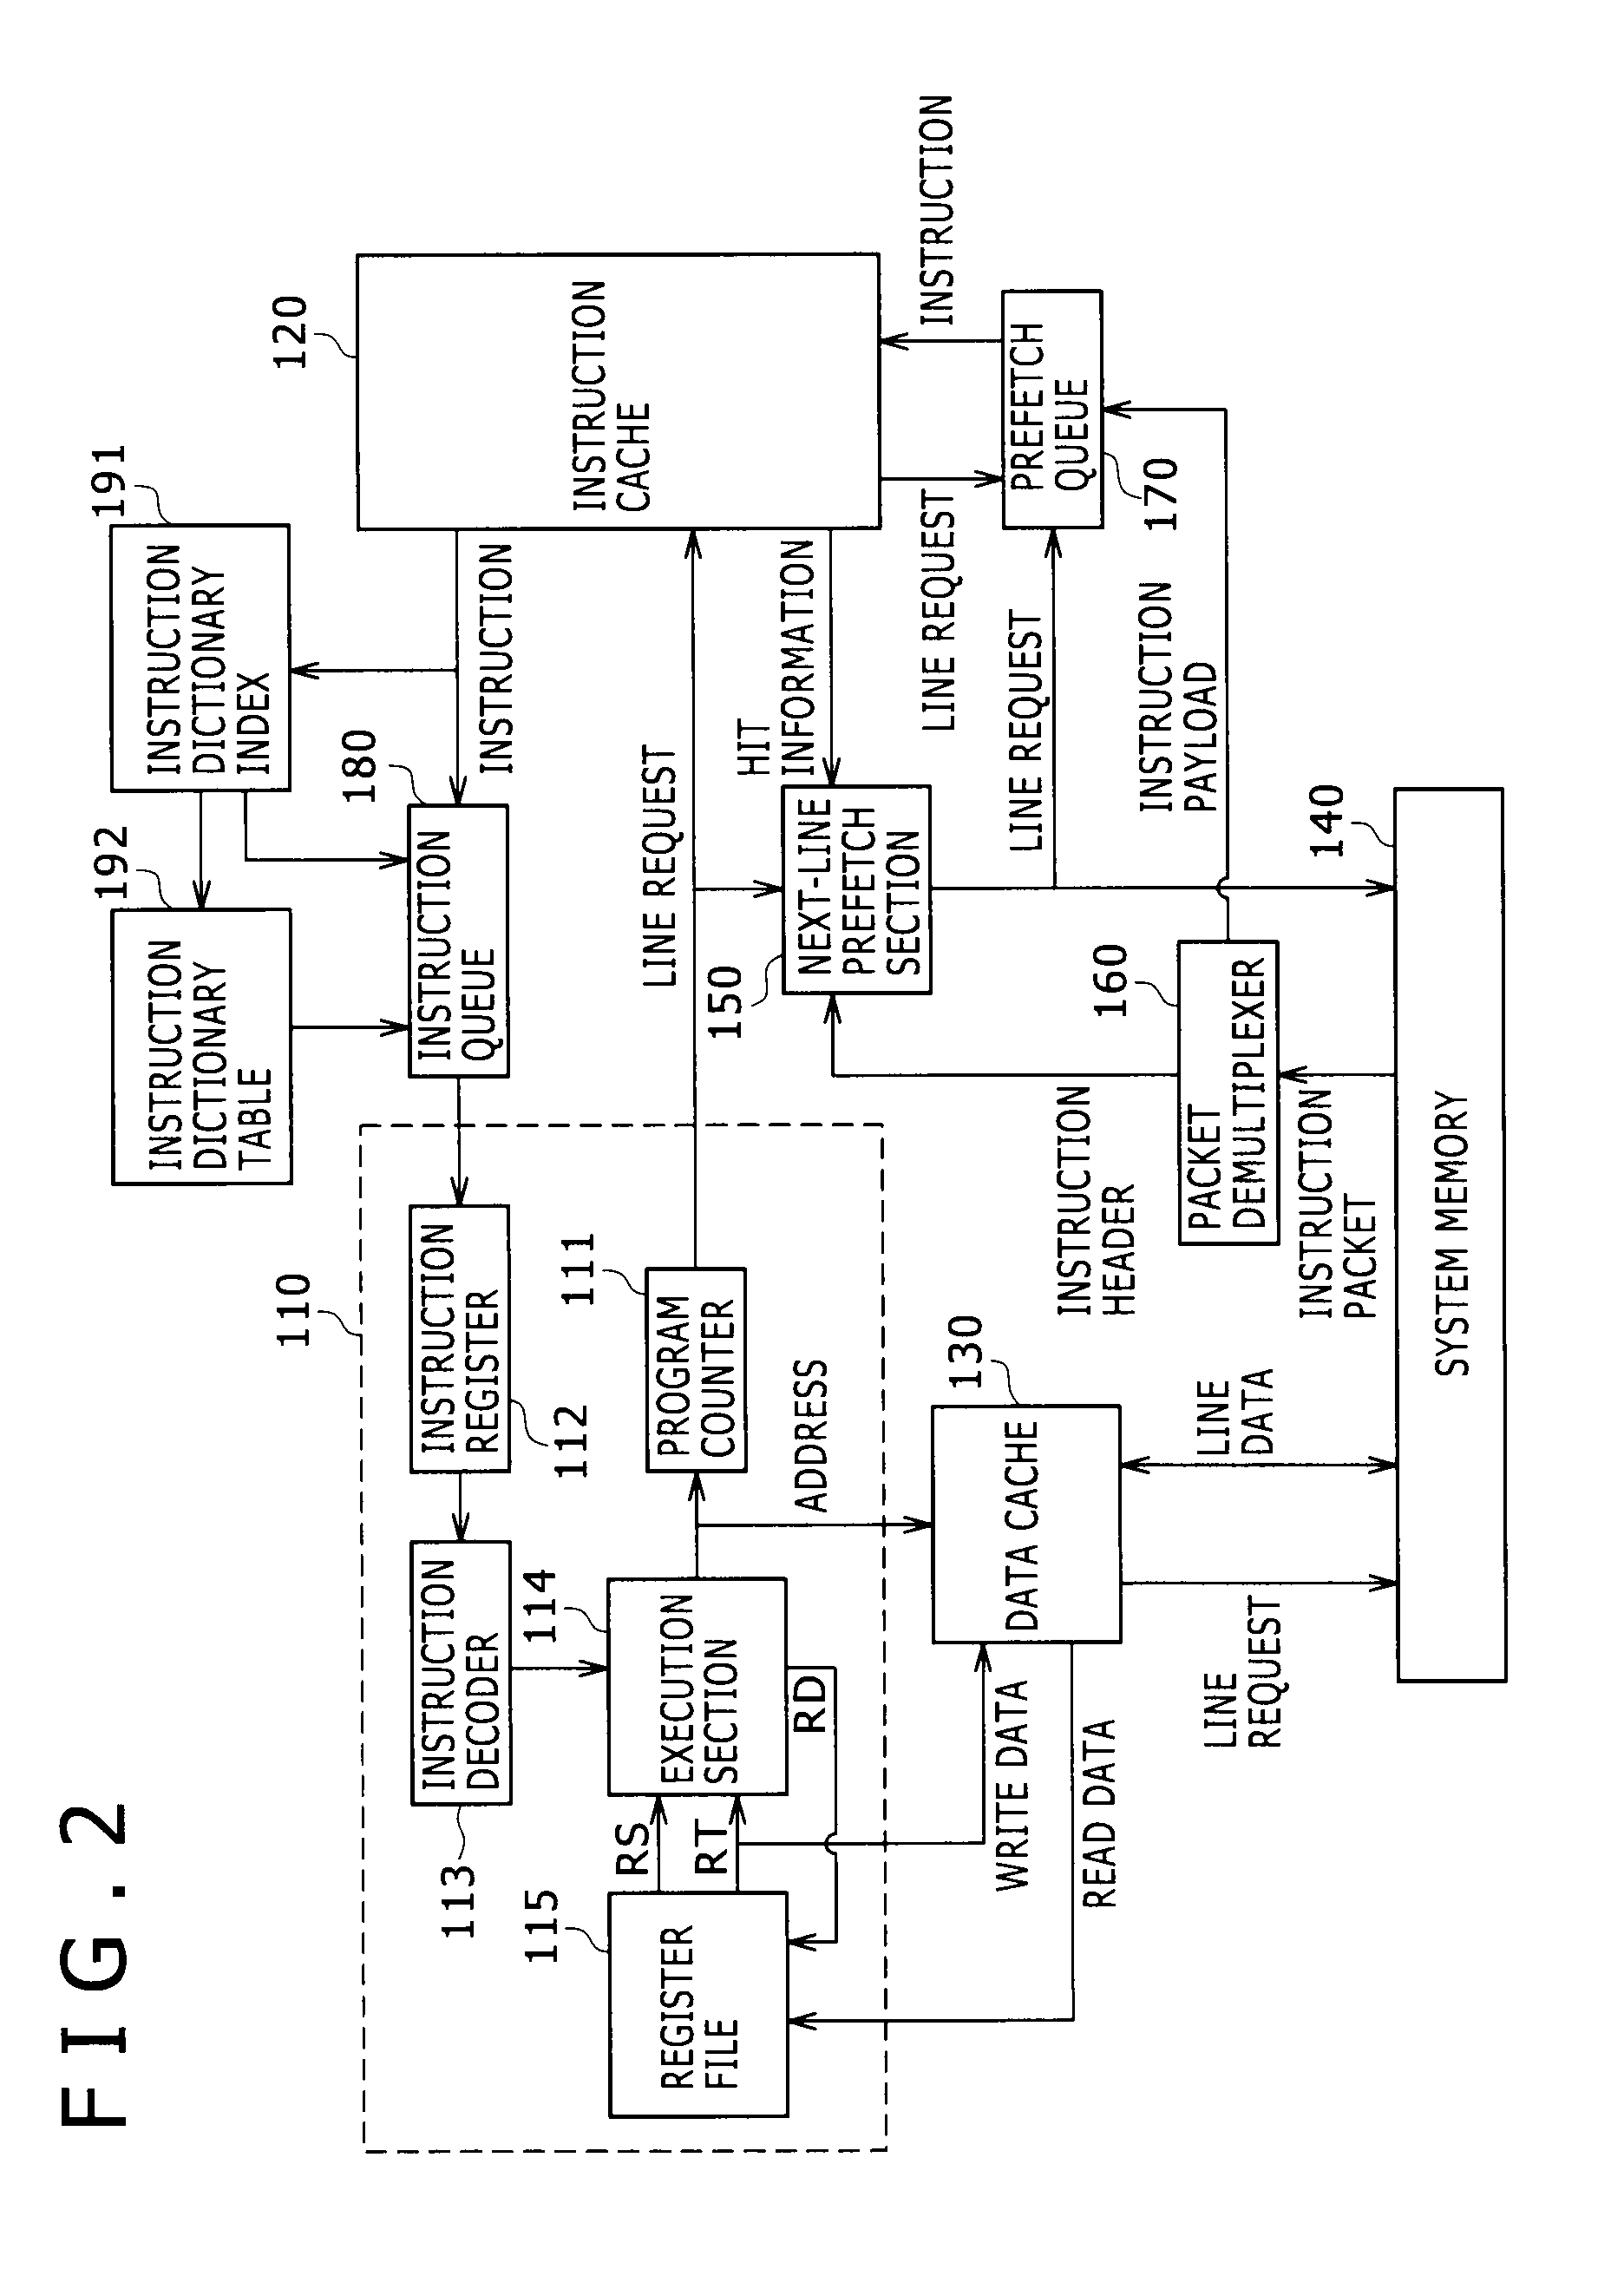 Instruction fetch apparatus and processor